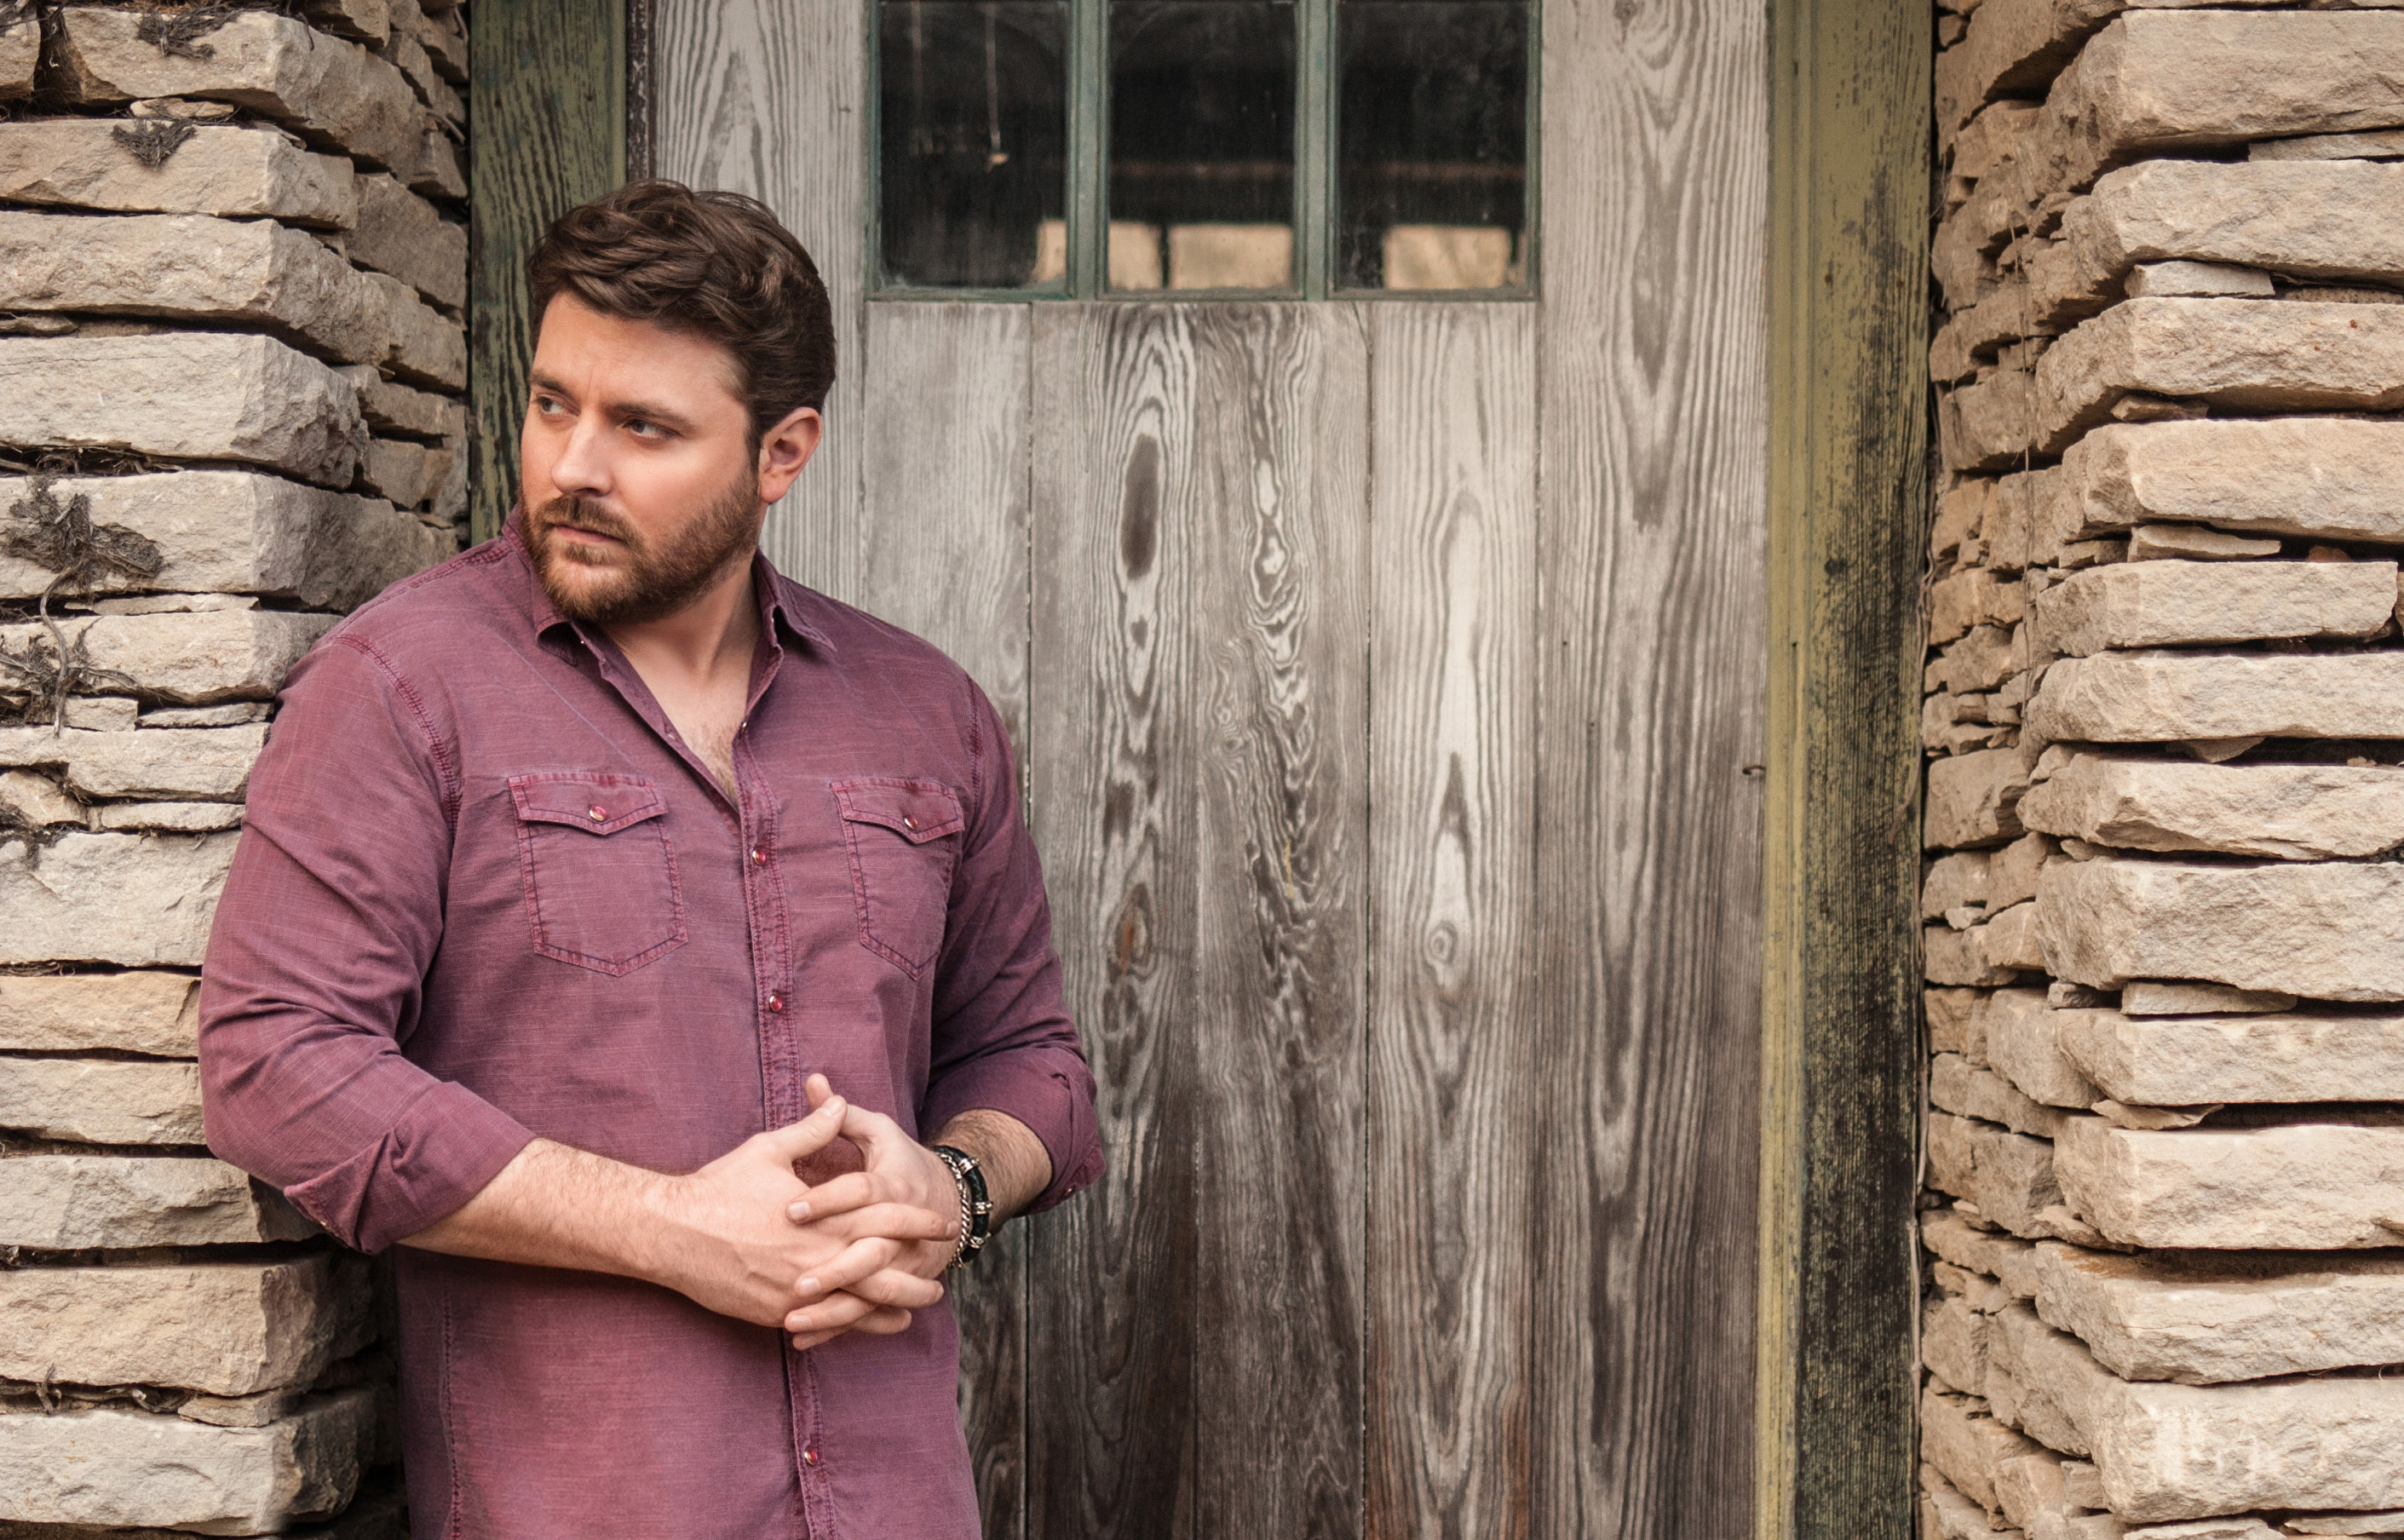 Chris Young, High-definition wallpapers, Music HQ, 4k pictures, 2830x1810 HD Desktop